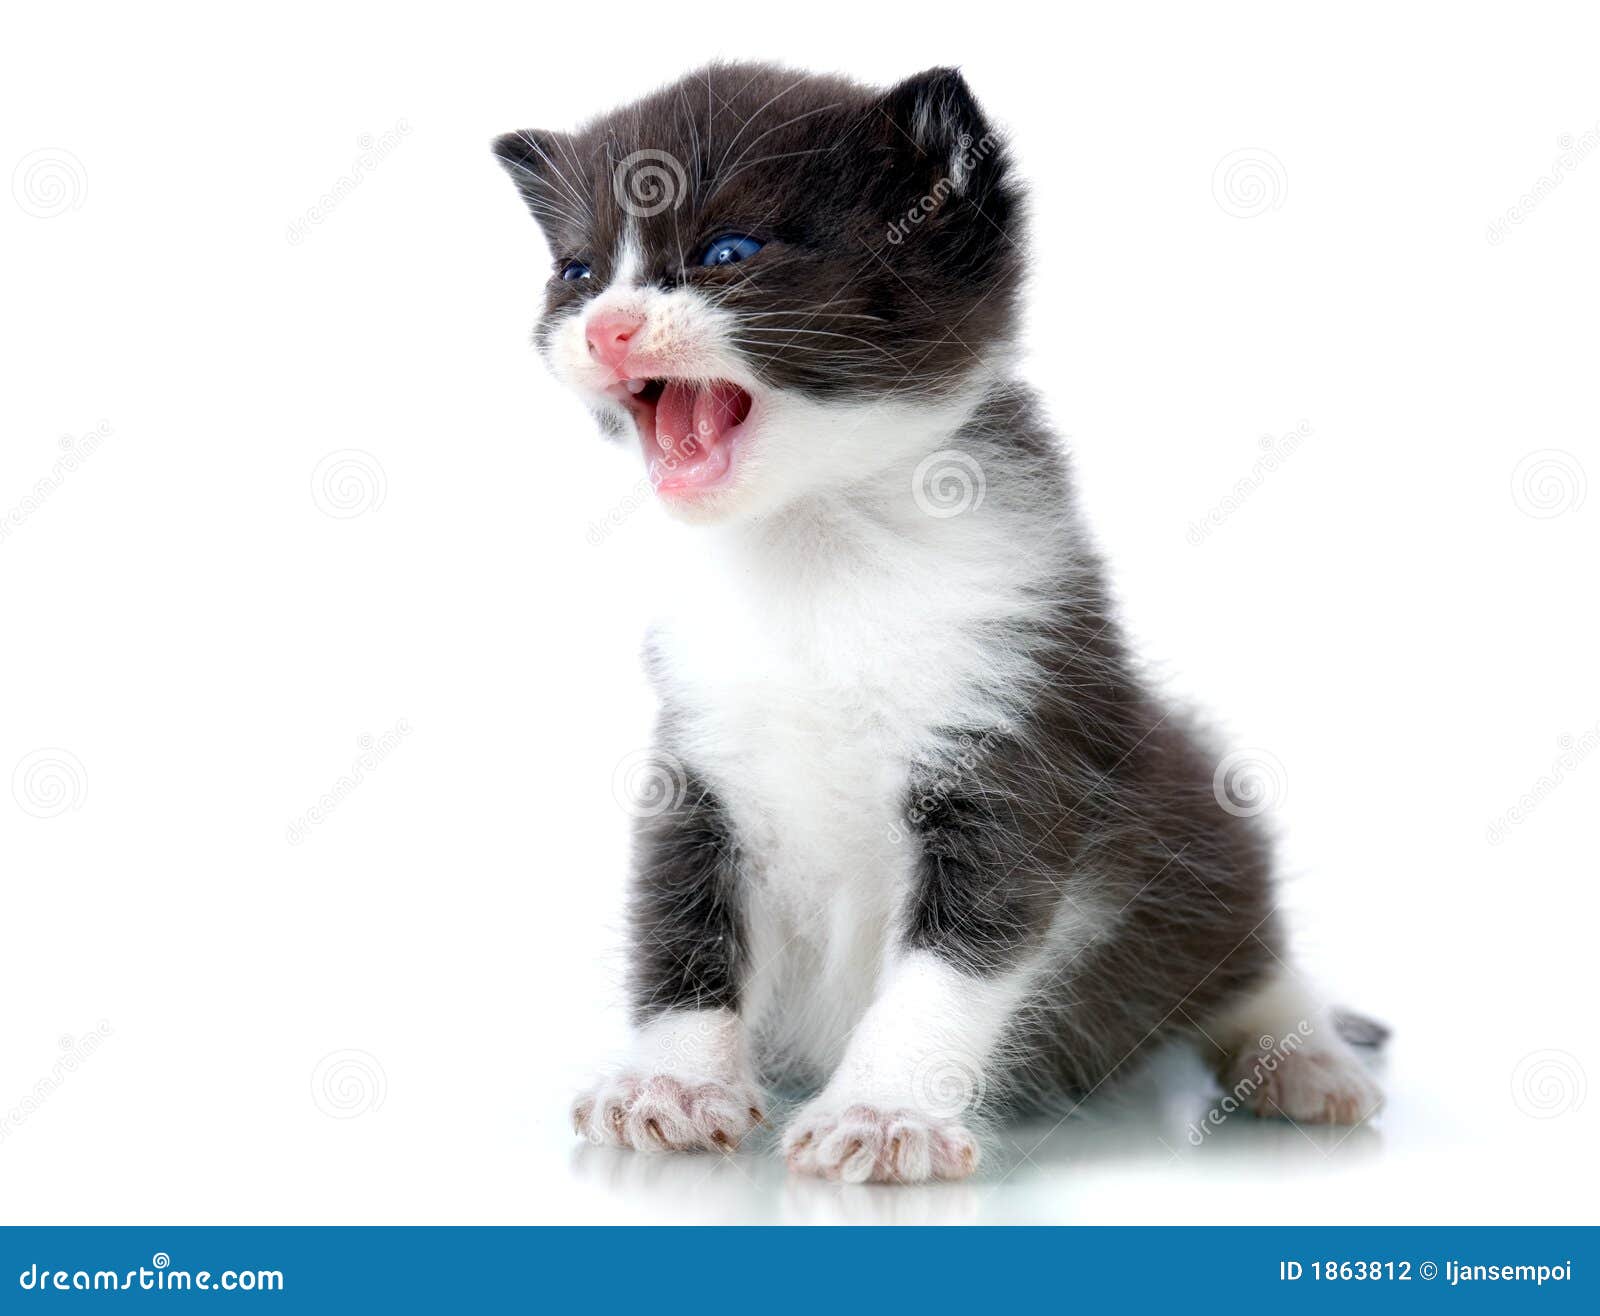 Funny Angry Kitten Pictures With Captions Mad Kitty Meme Funny